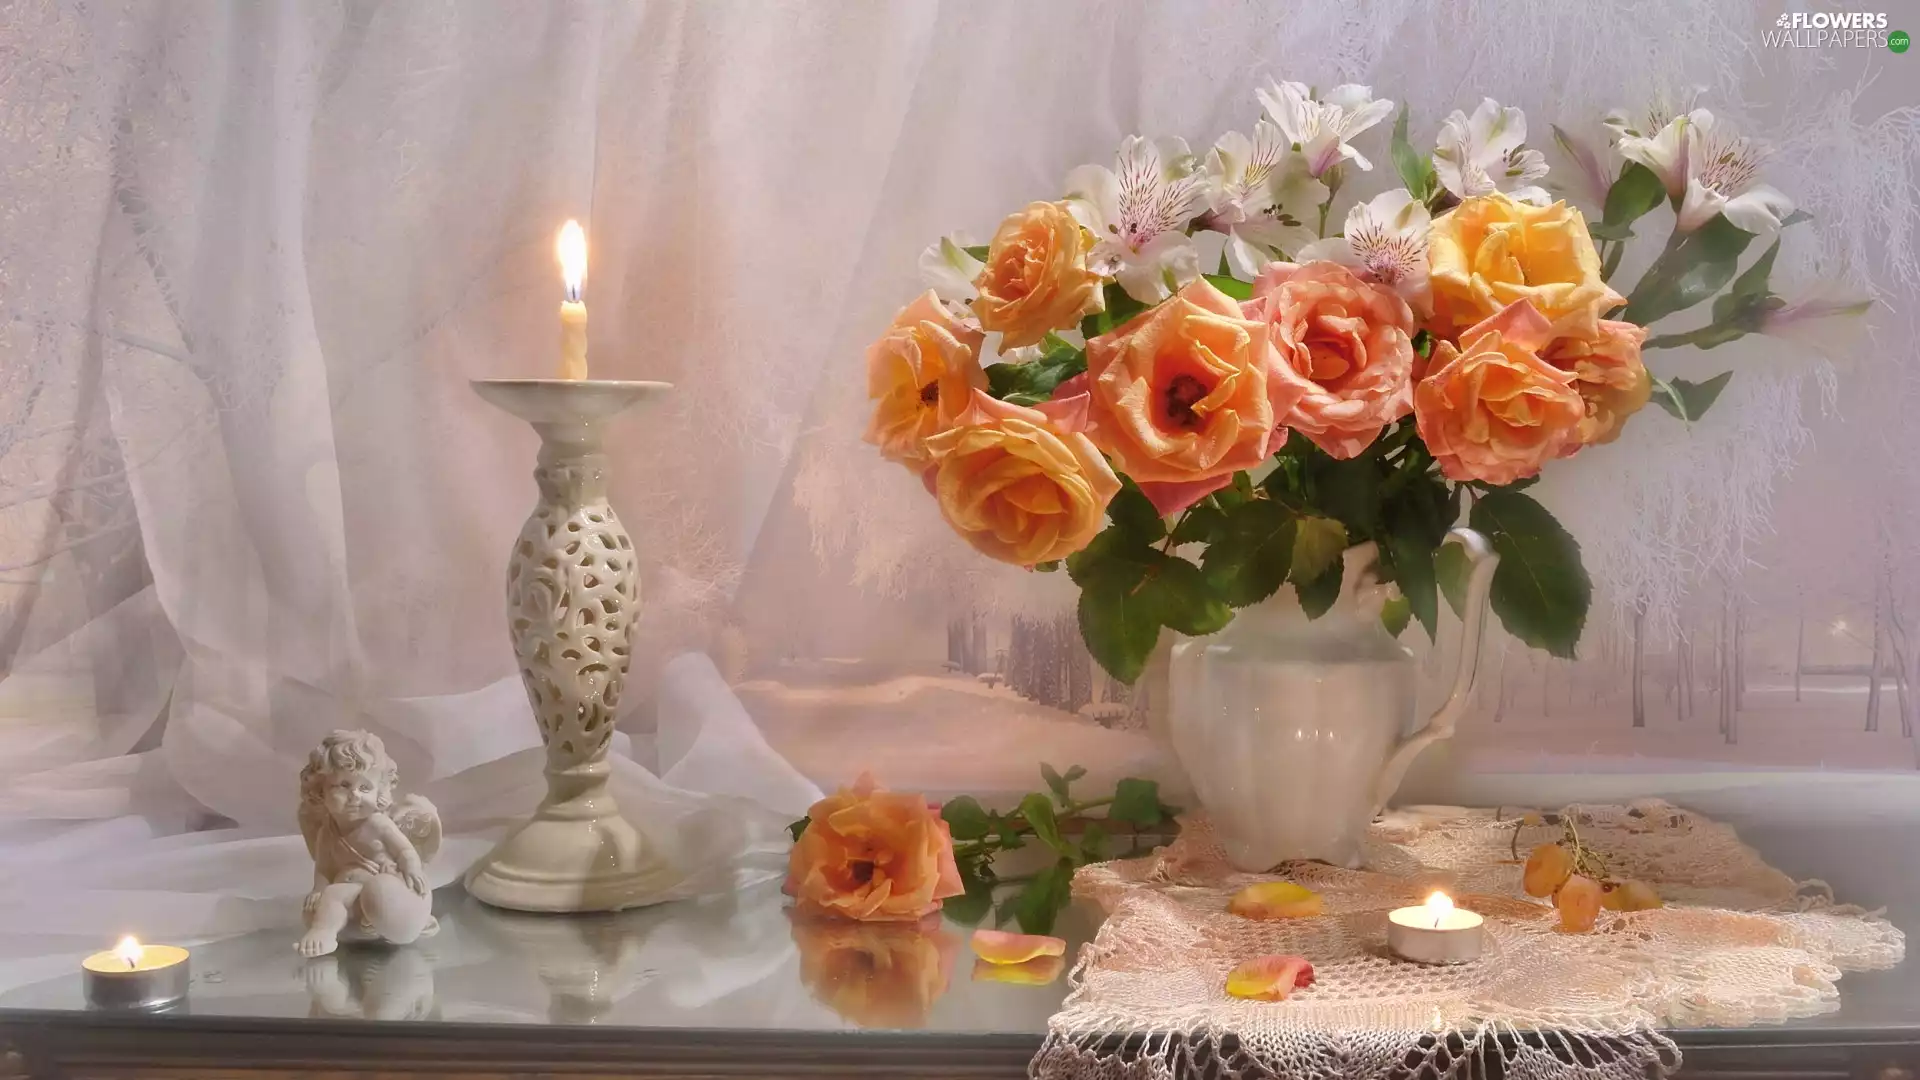 Flowers, composition, roses, Alstroemeria, angel, Table, candle, figure, Vase